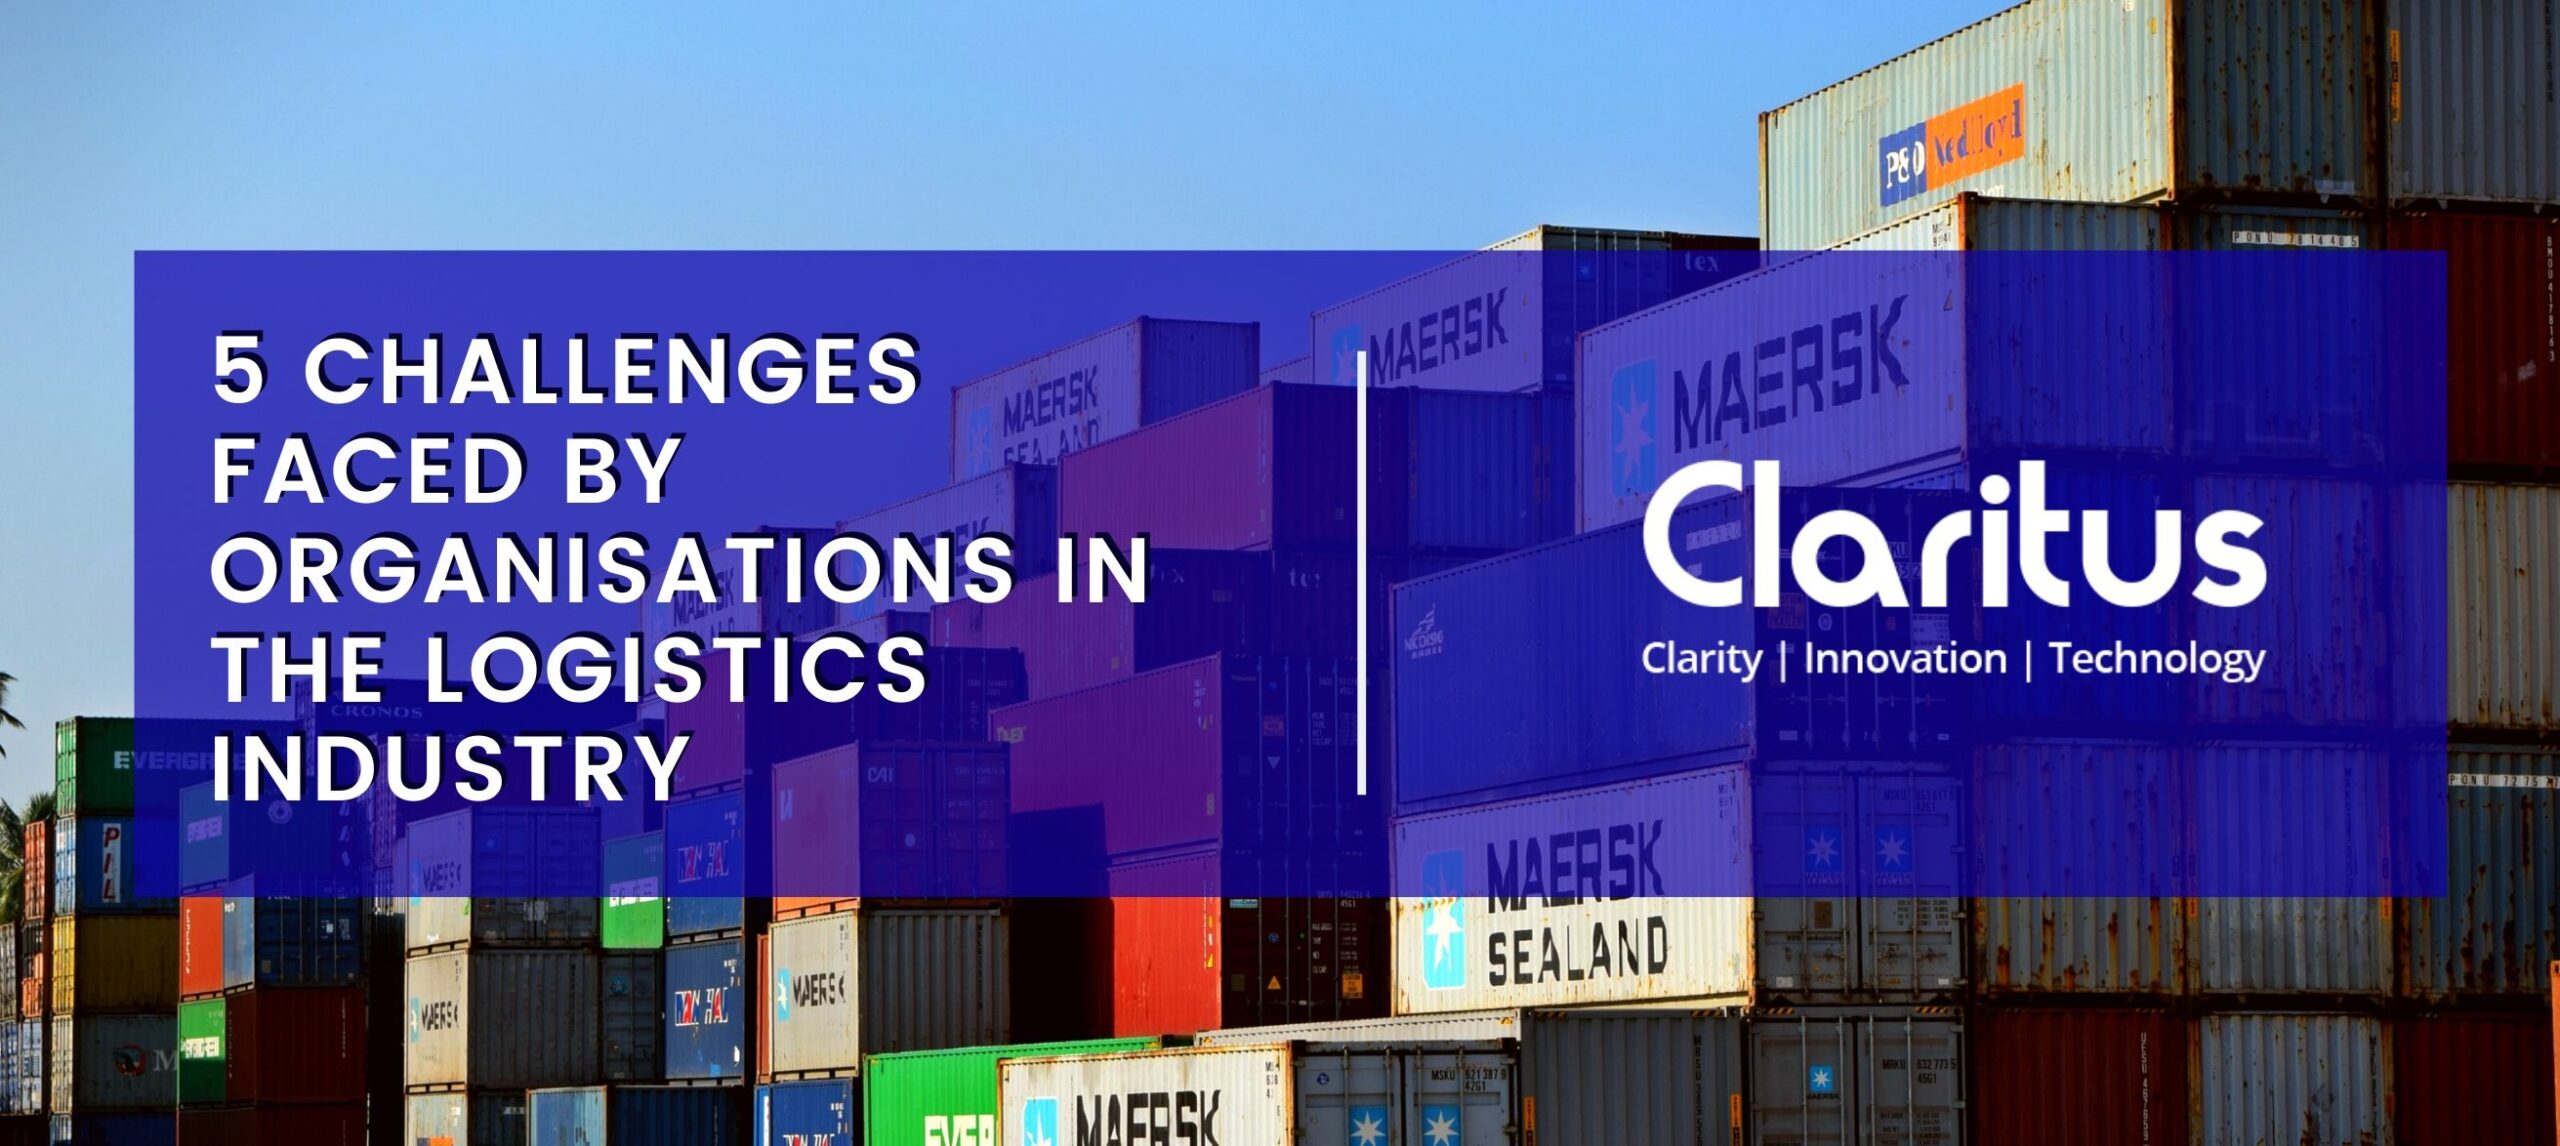 5 Challenges faced by ORGANISATIONS in the logistics industry scaled